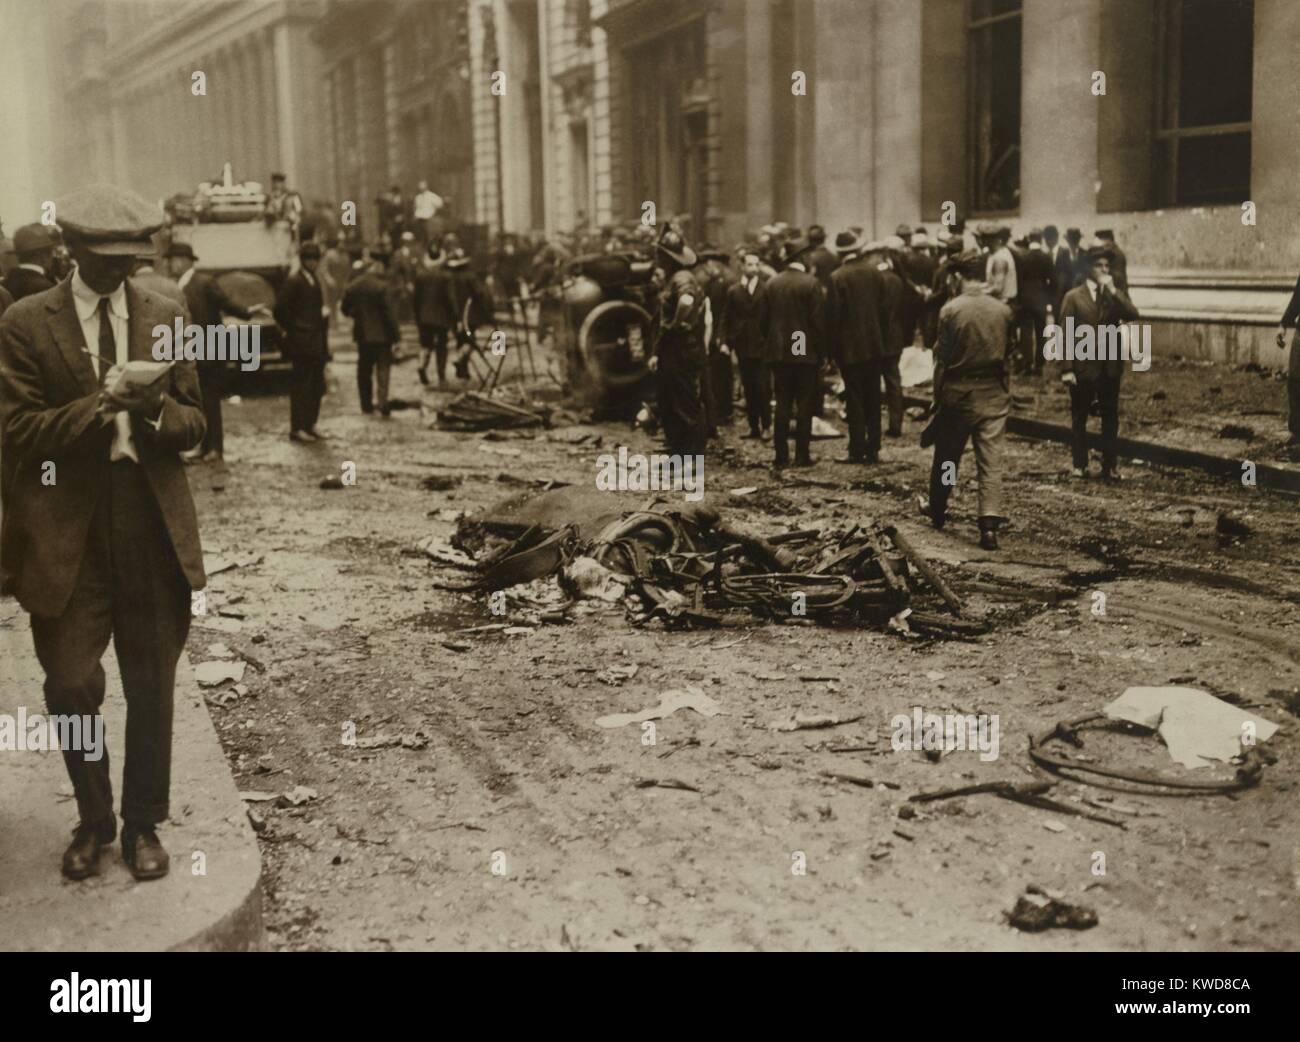 Crowd gathered behind a dead horse after the Wall Street Bombing, Sept. 16, 1920. The dead horse was the biggest clue to the bombing. When the New York Stock Exchange ordered an immediate clean up. it was removed and sent away to be 'ground into paste.' At left, a New York City reporter walks as he writes notes. The Morgan Bank is at right. (BSLOC 2015 17 238) Stock Photo